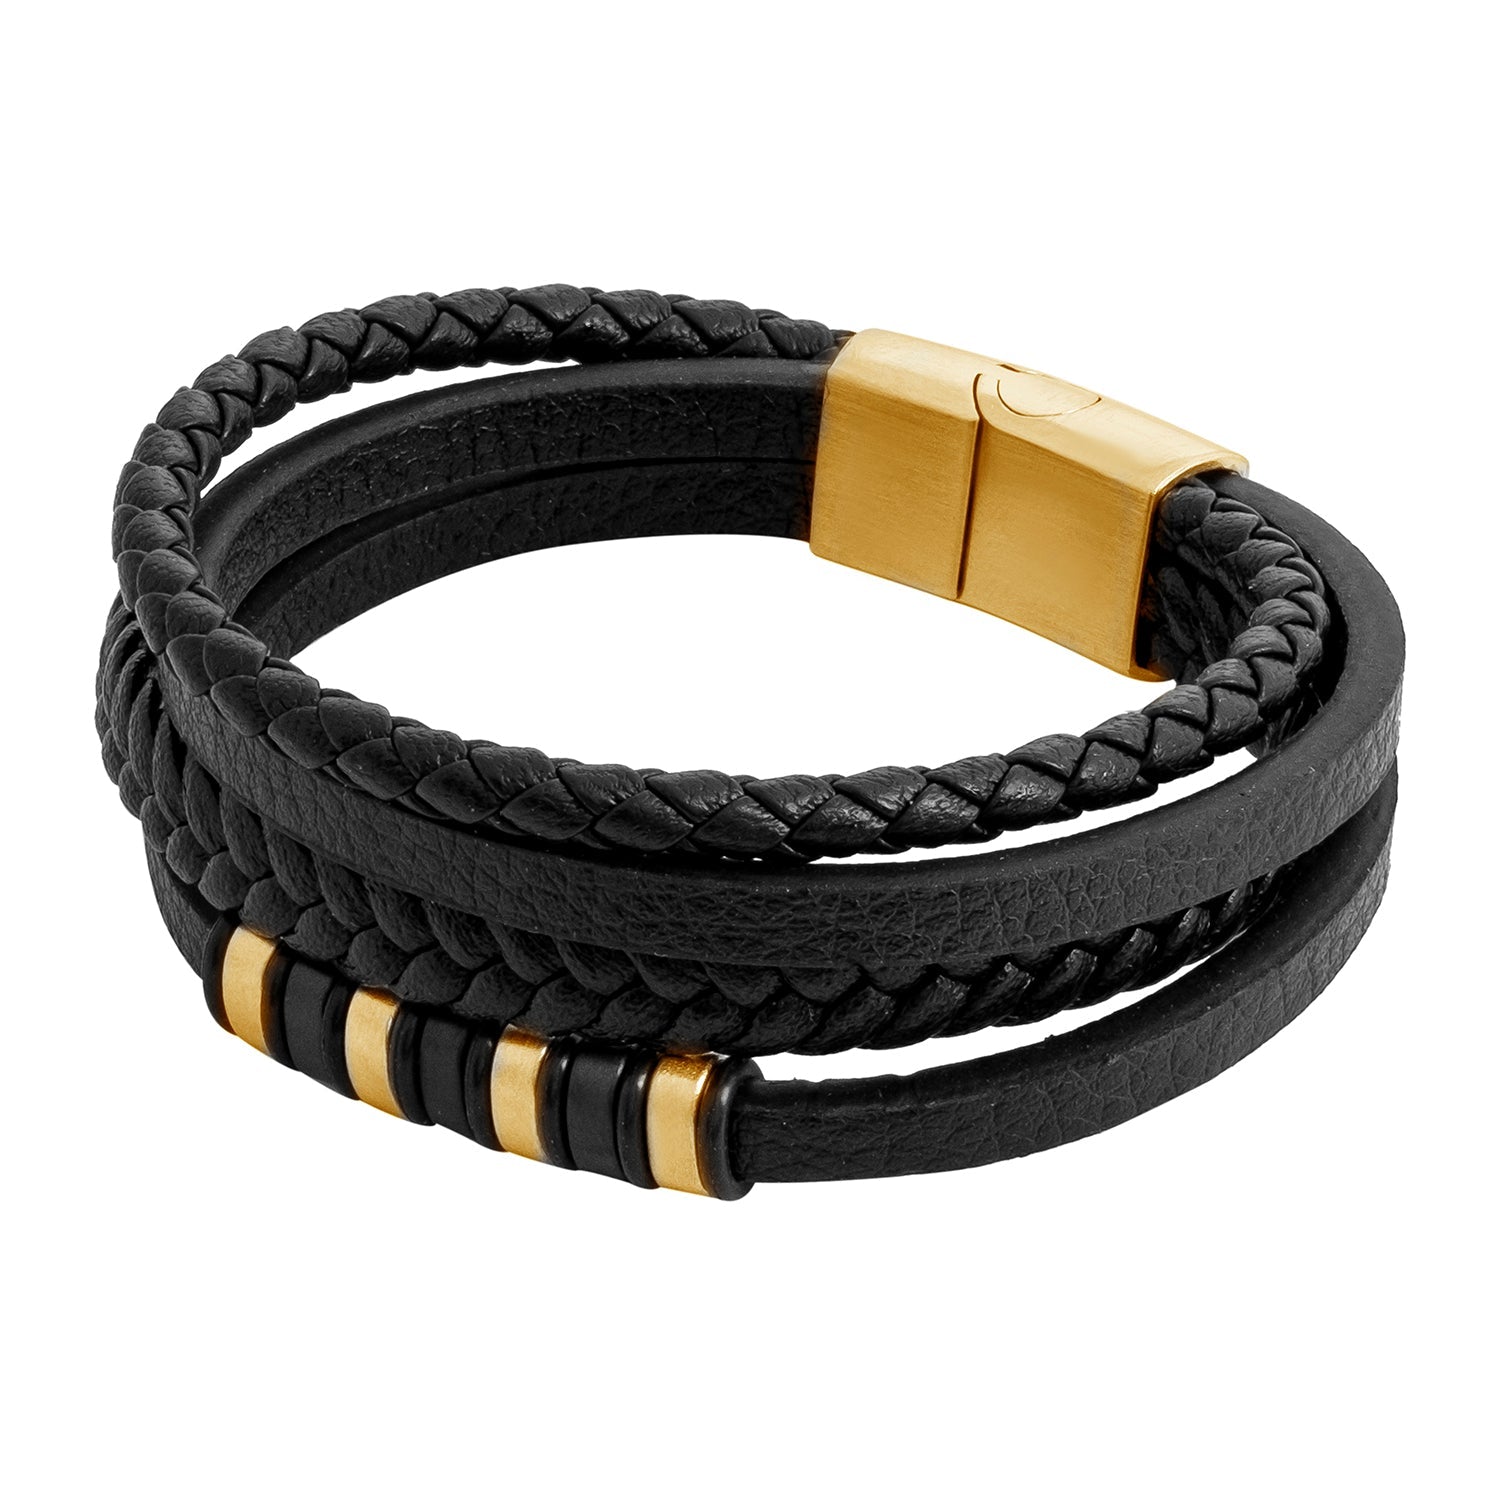 XQNI Mens Leather Mens Leather Bracelet Simple Black Stainless Steel Button  Design With Hand Woven Neutral Accessories Perfect Jewelry Gift L231115  From Scarf_01store, $2.17 | DHgate.Com